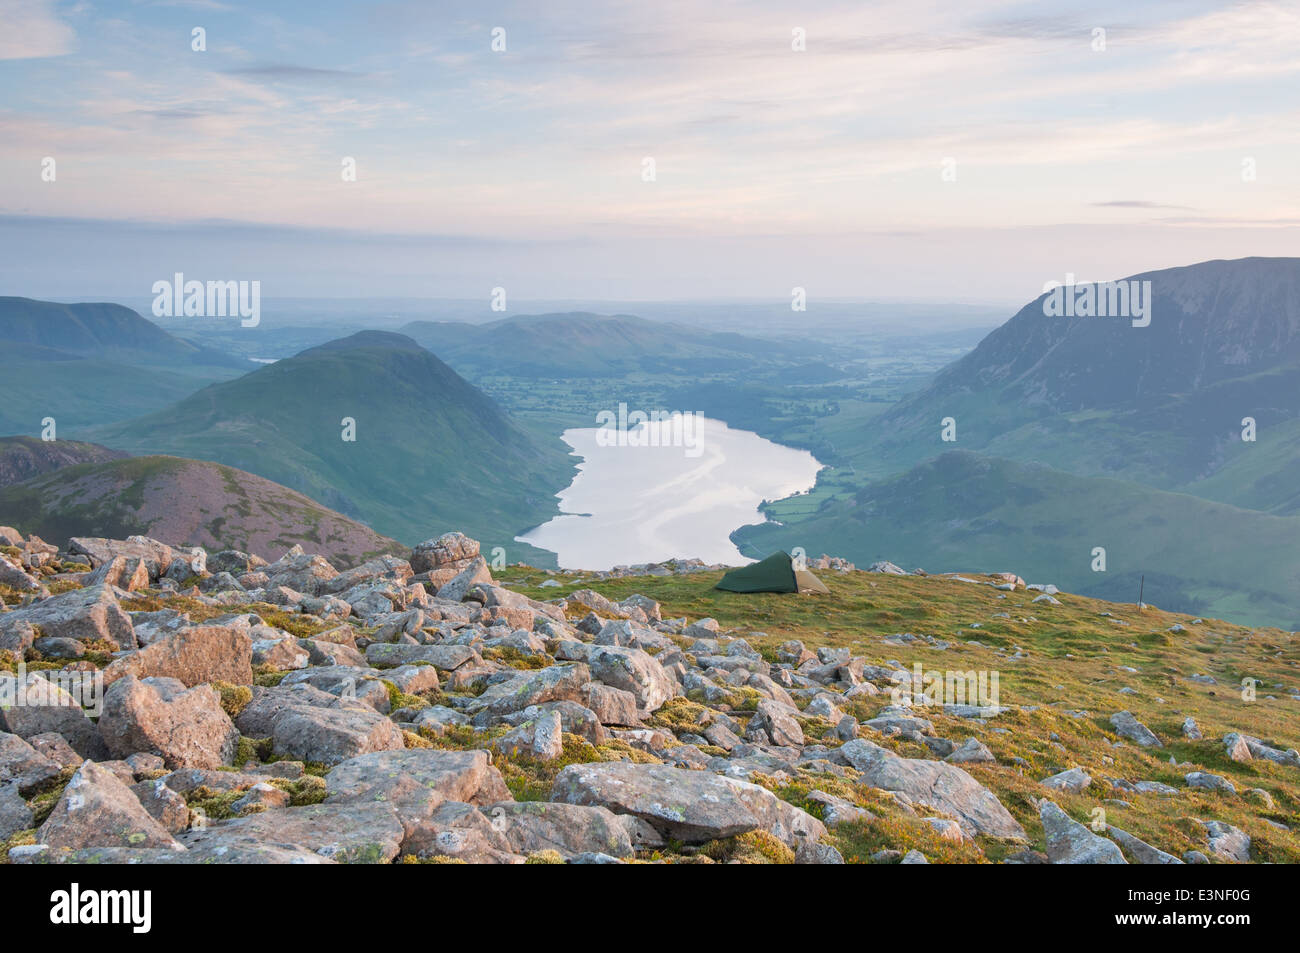 Wild camping on High Stile above Buttermere, with Crummock Water in the background, English Lake District Stock Photo